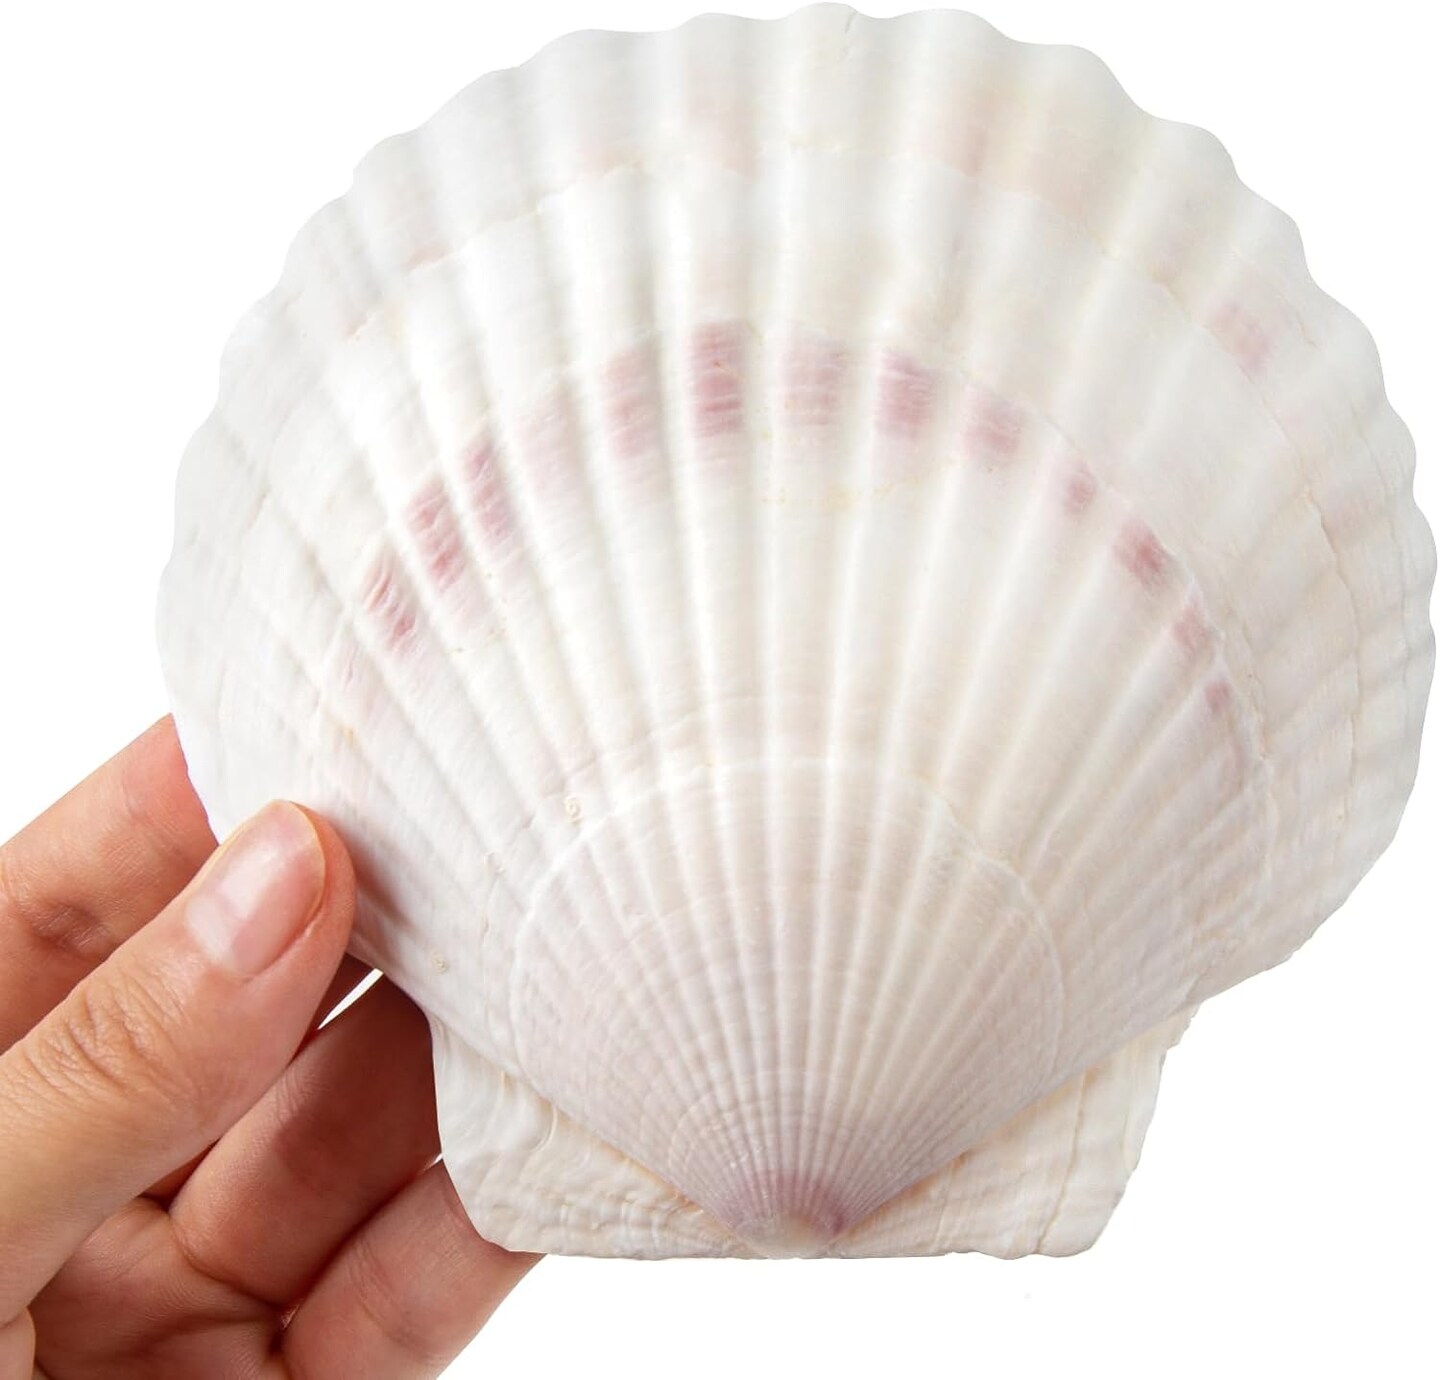 5 Inches Natural Seashell for Home Decoration 8 pcs